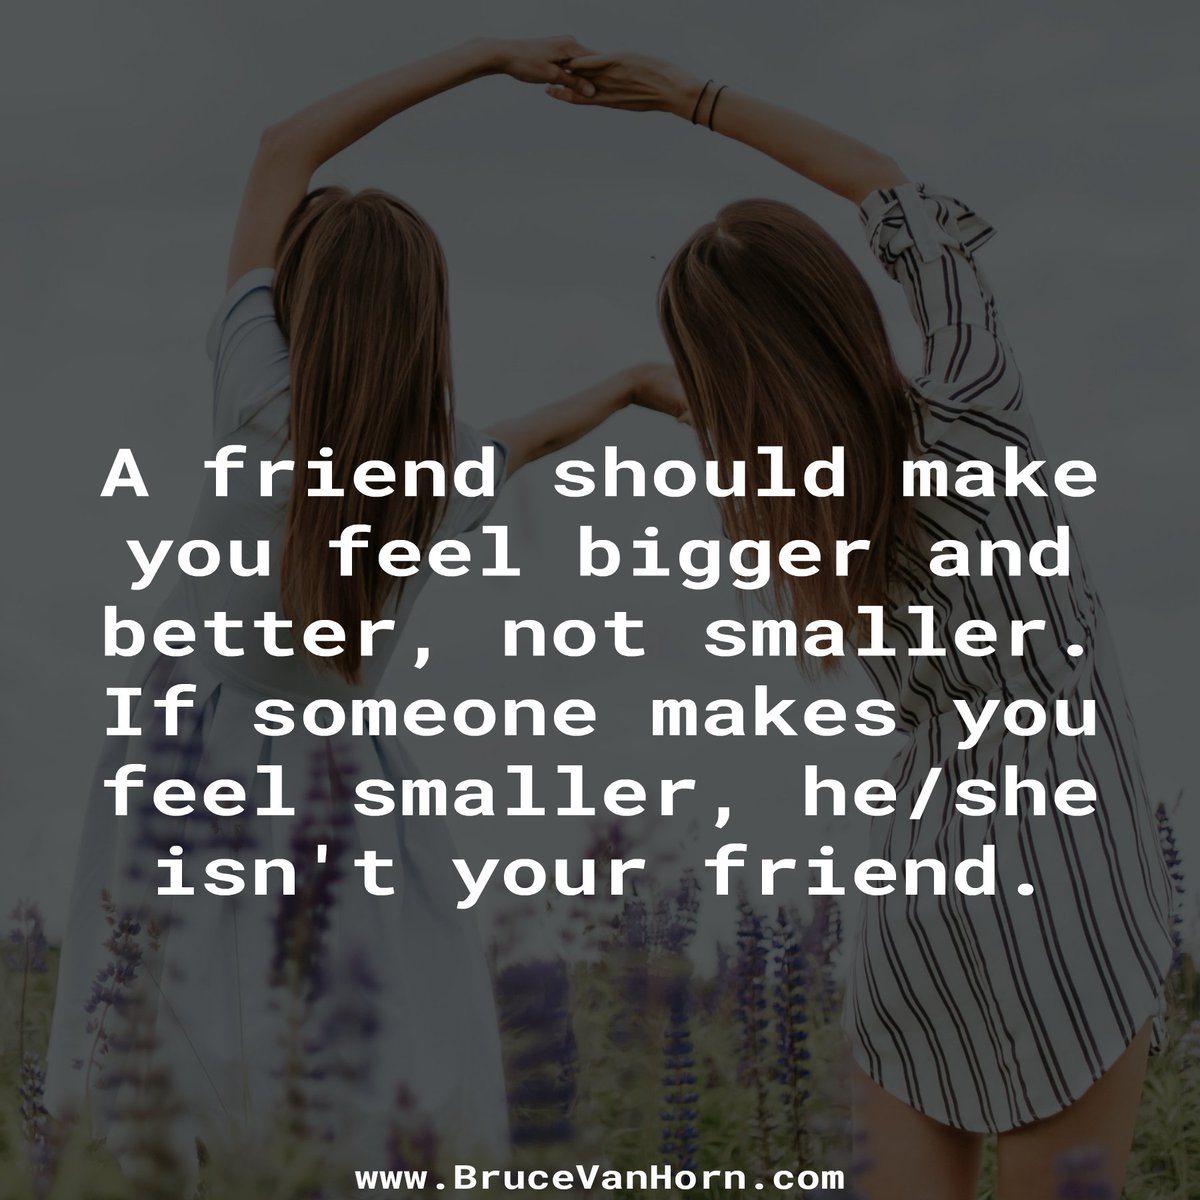 A friend should make you feel bigger and better, not smaller. If someone makes you feel smaller, he/she isn't your friend.